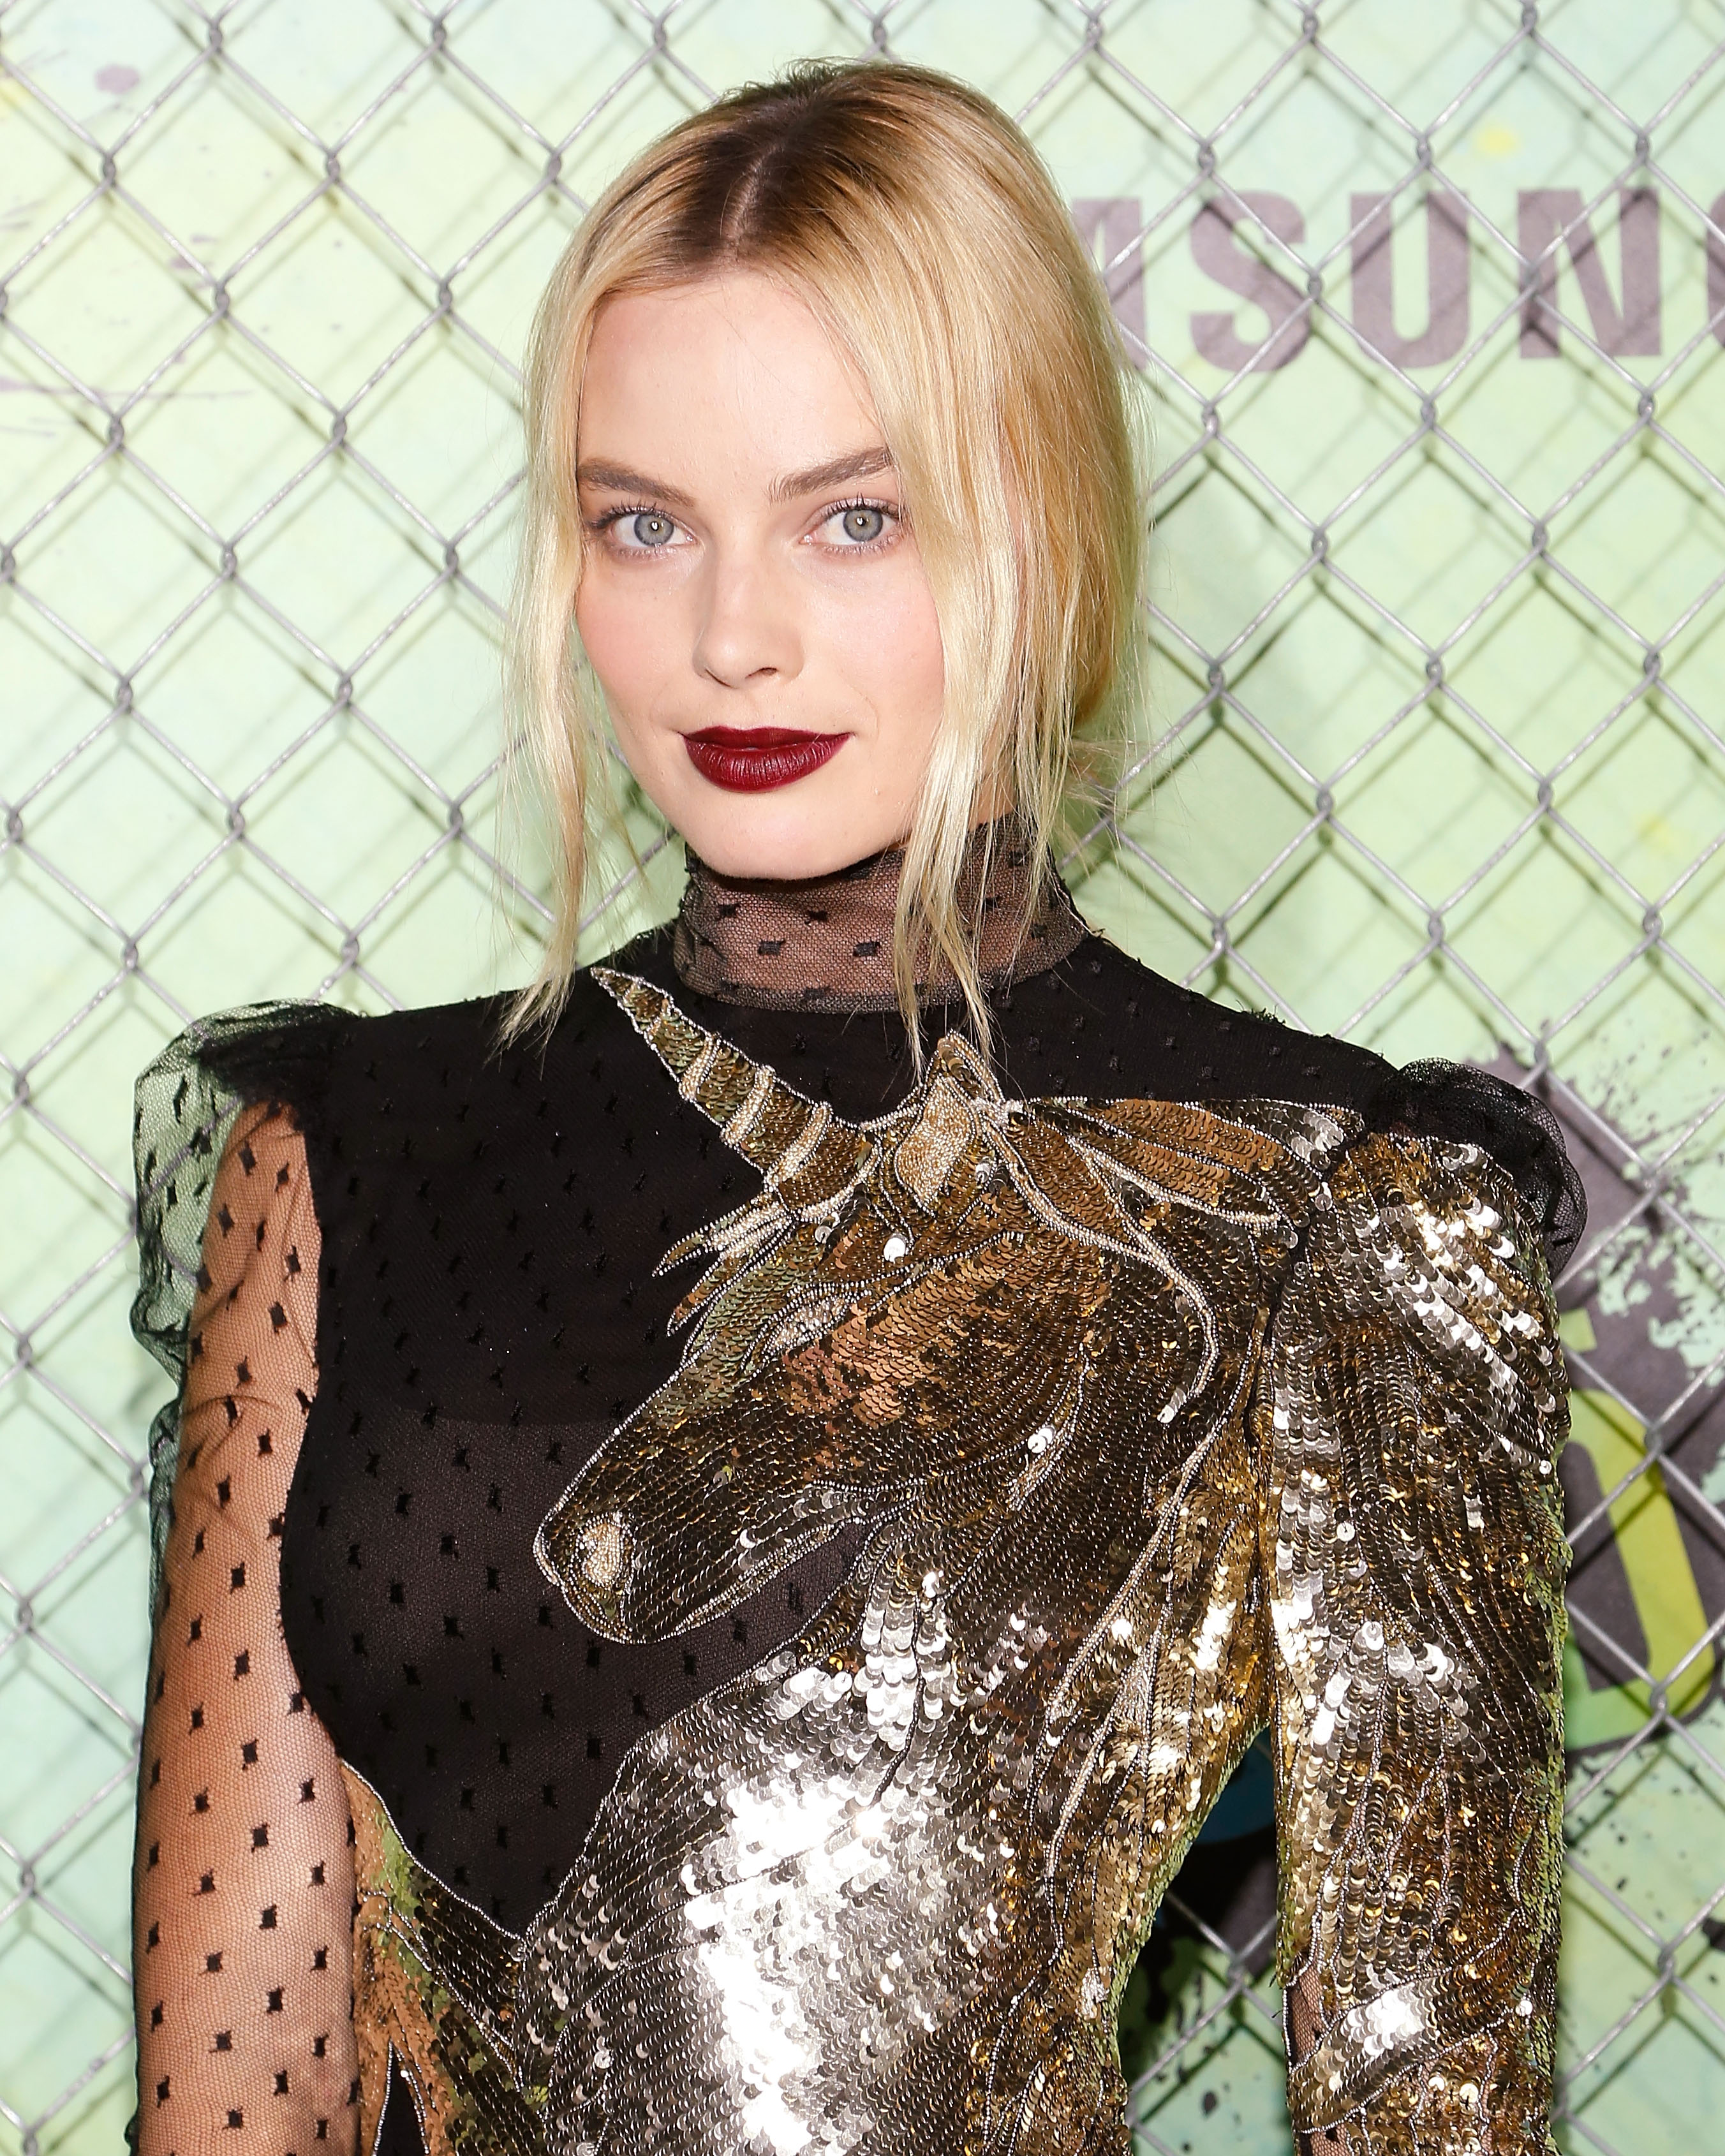 Margot Robbie attends the world premiere of "Suicide Squad" on August 1, 2016 in New York City.